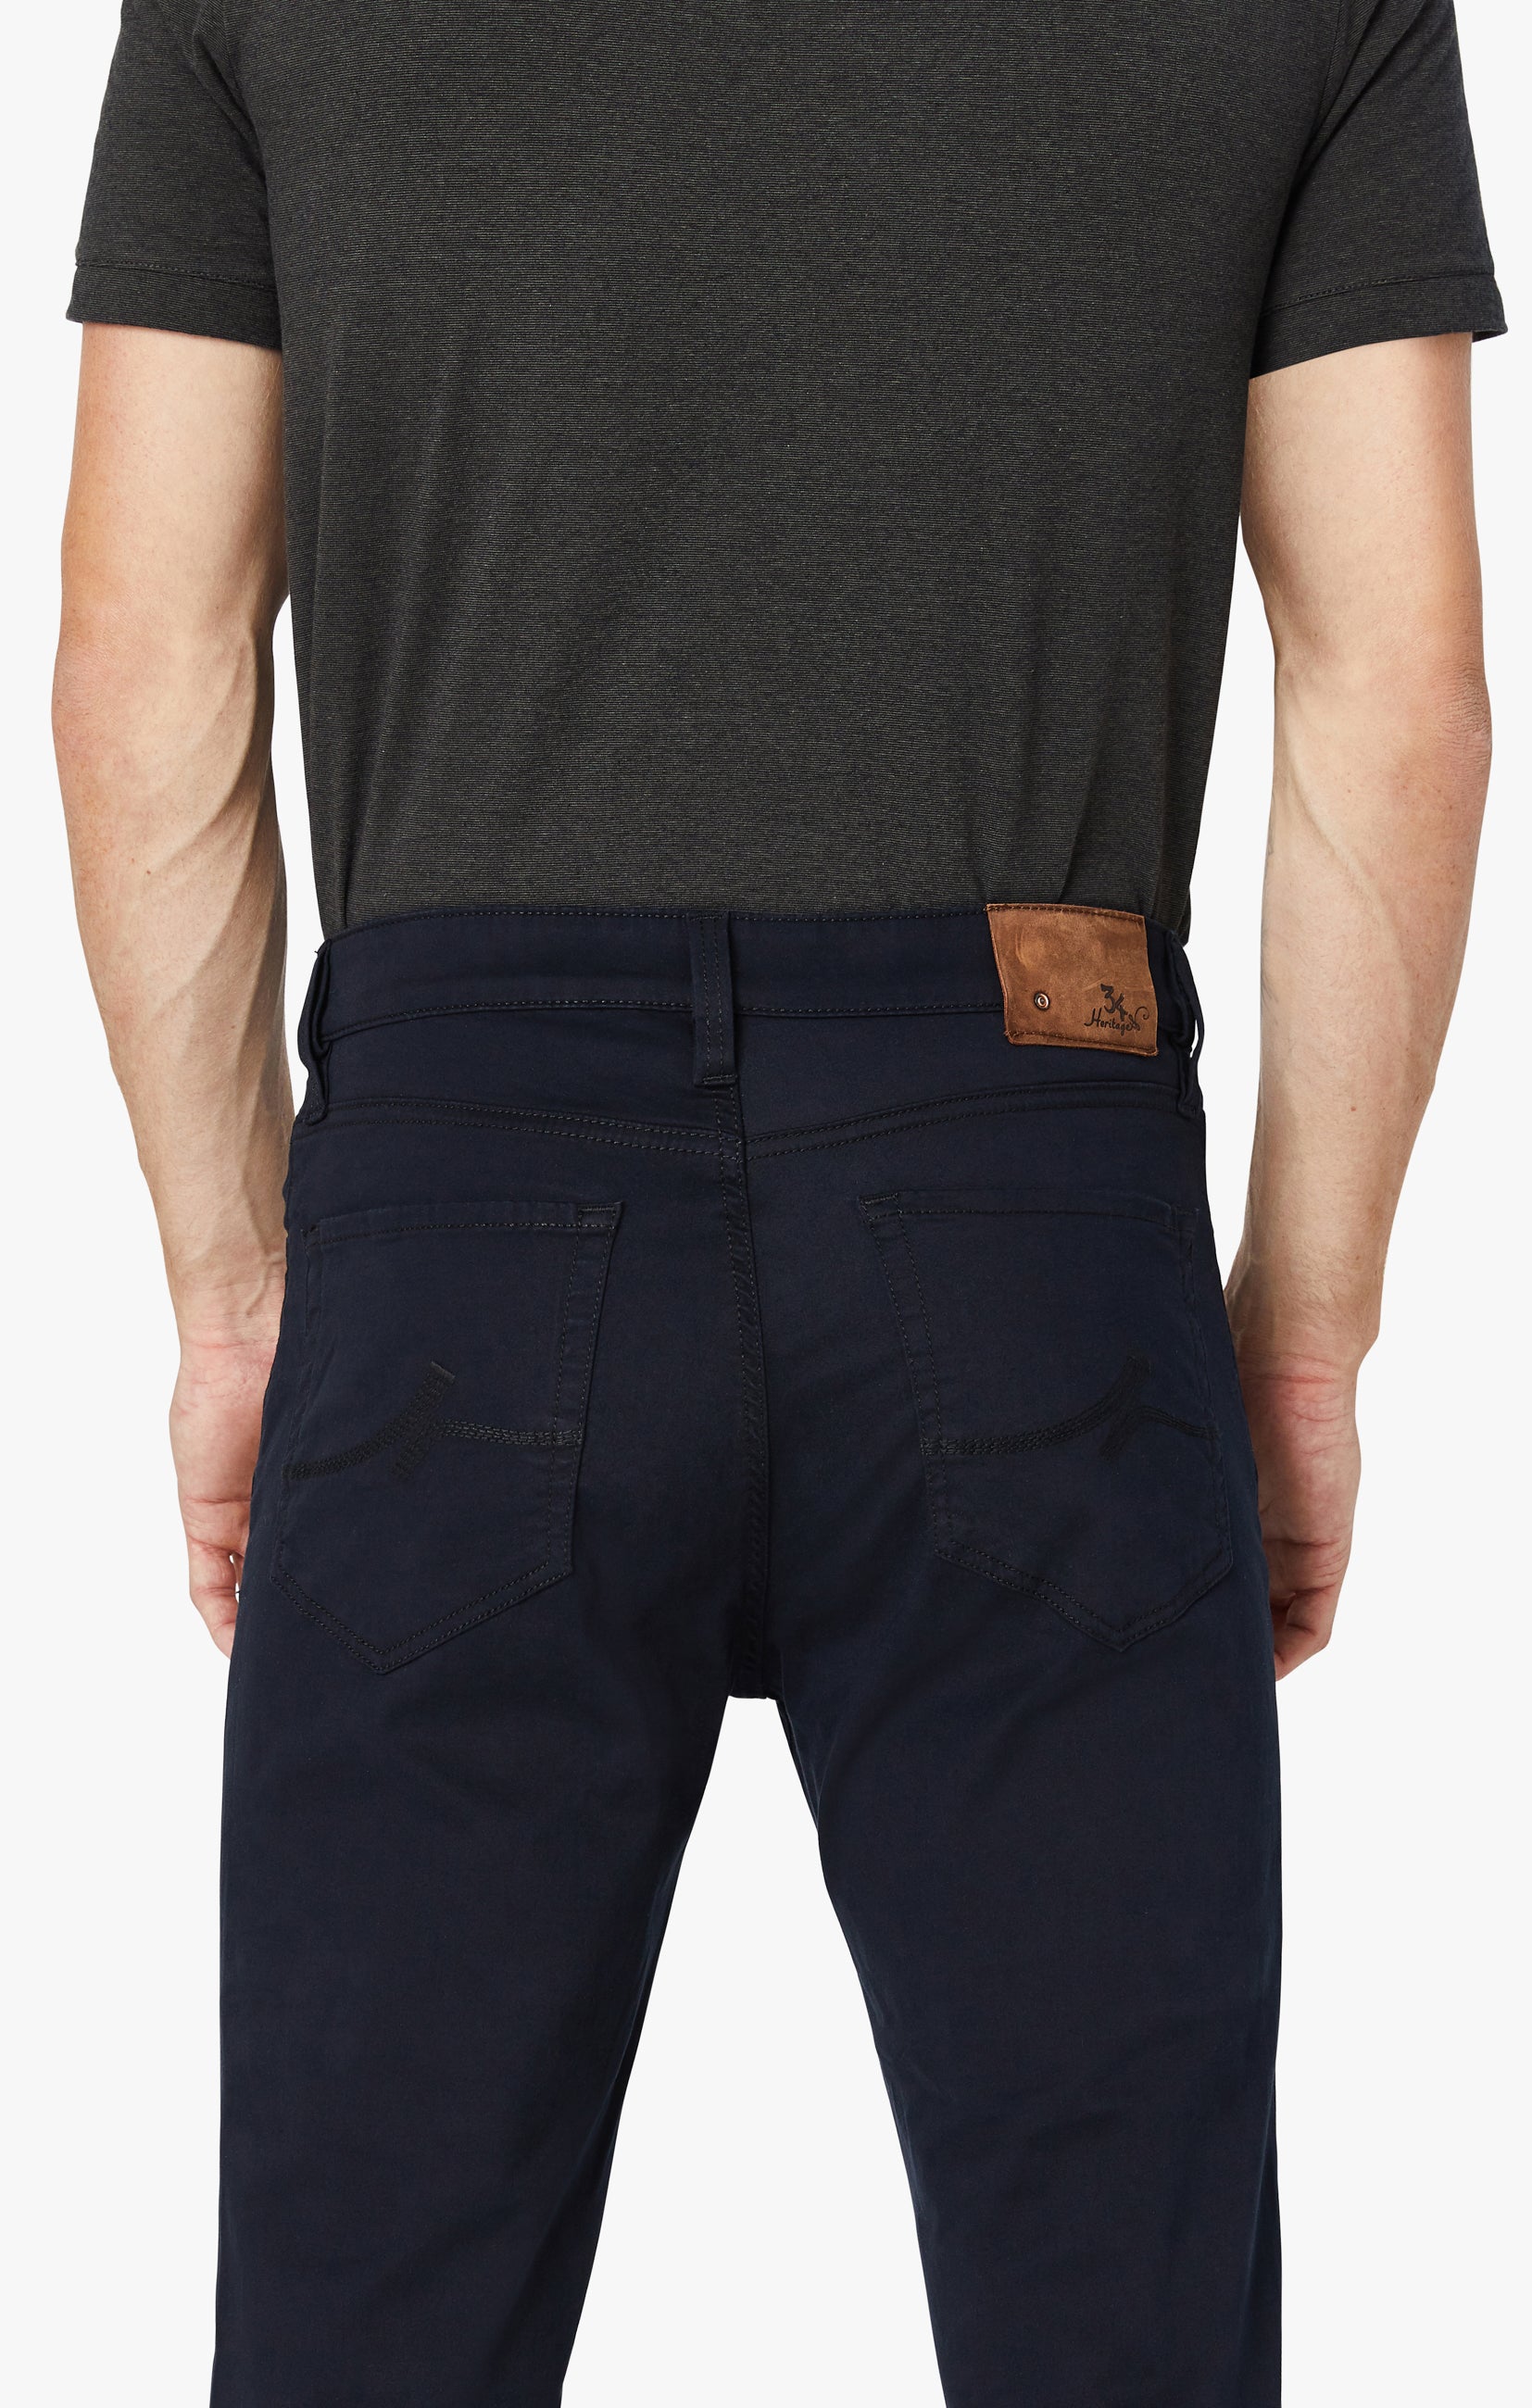 Charisma Classic Fit Pants in Navy Twill Image 8